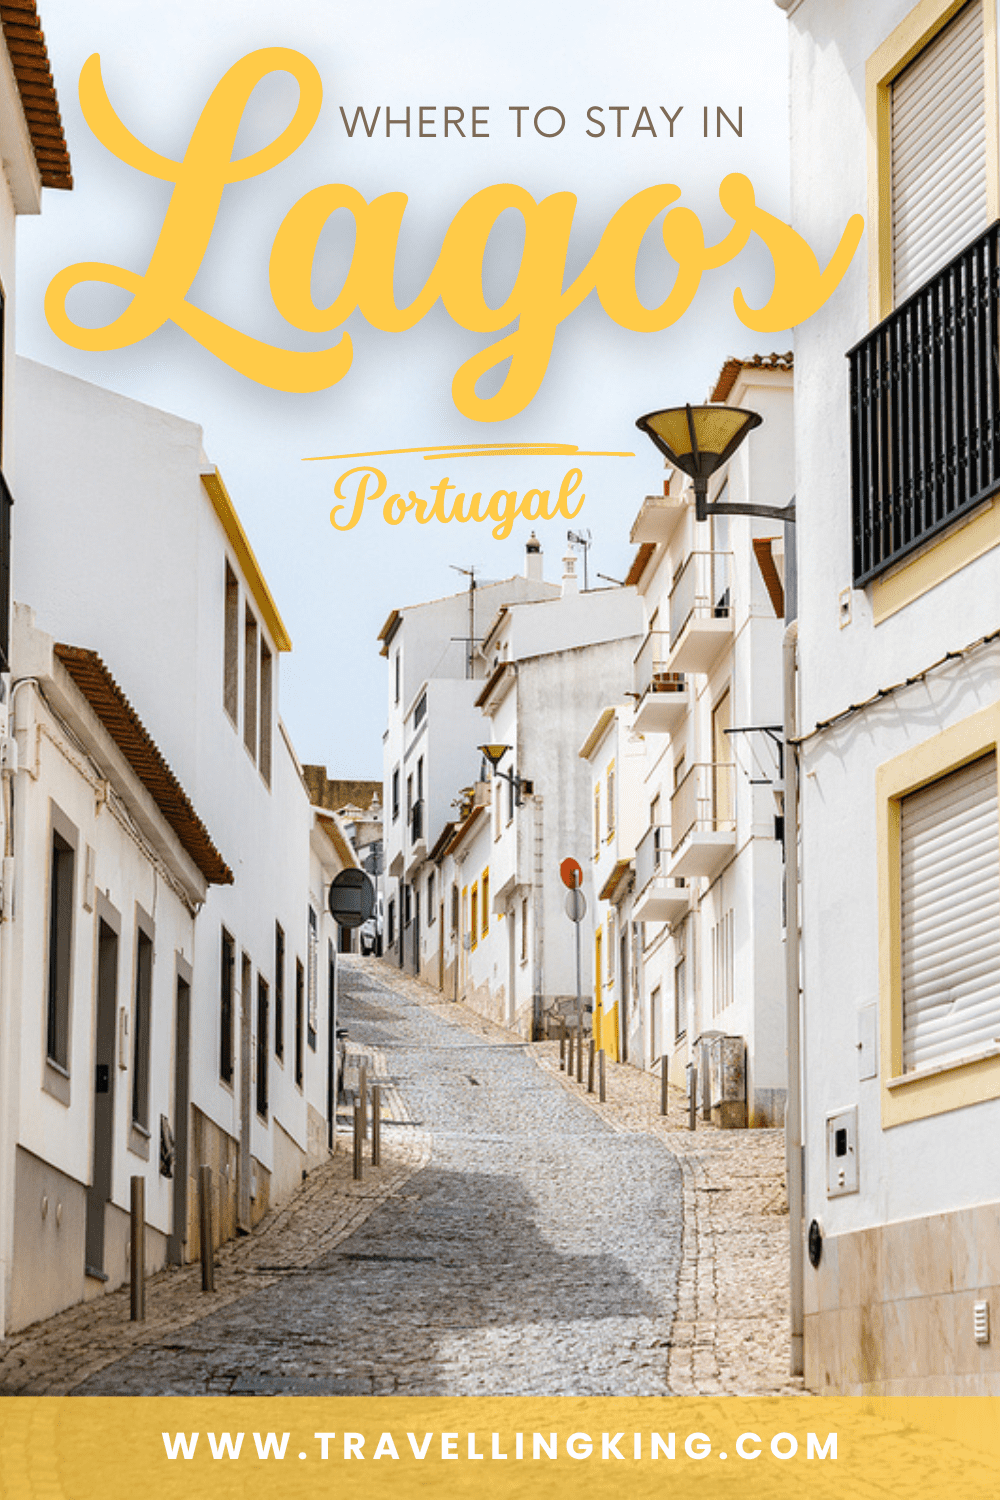 Where to stay in Lagos, Portugal